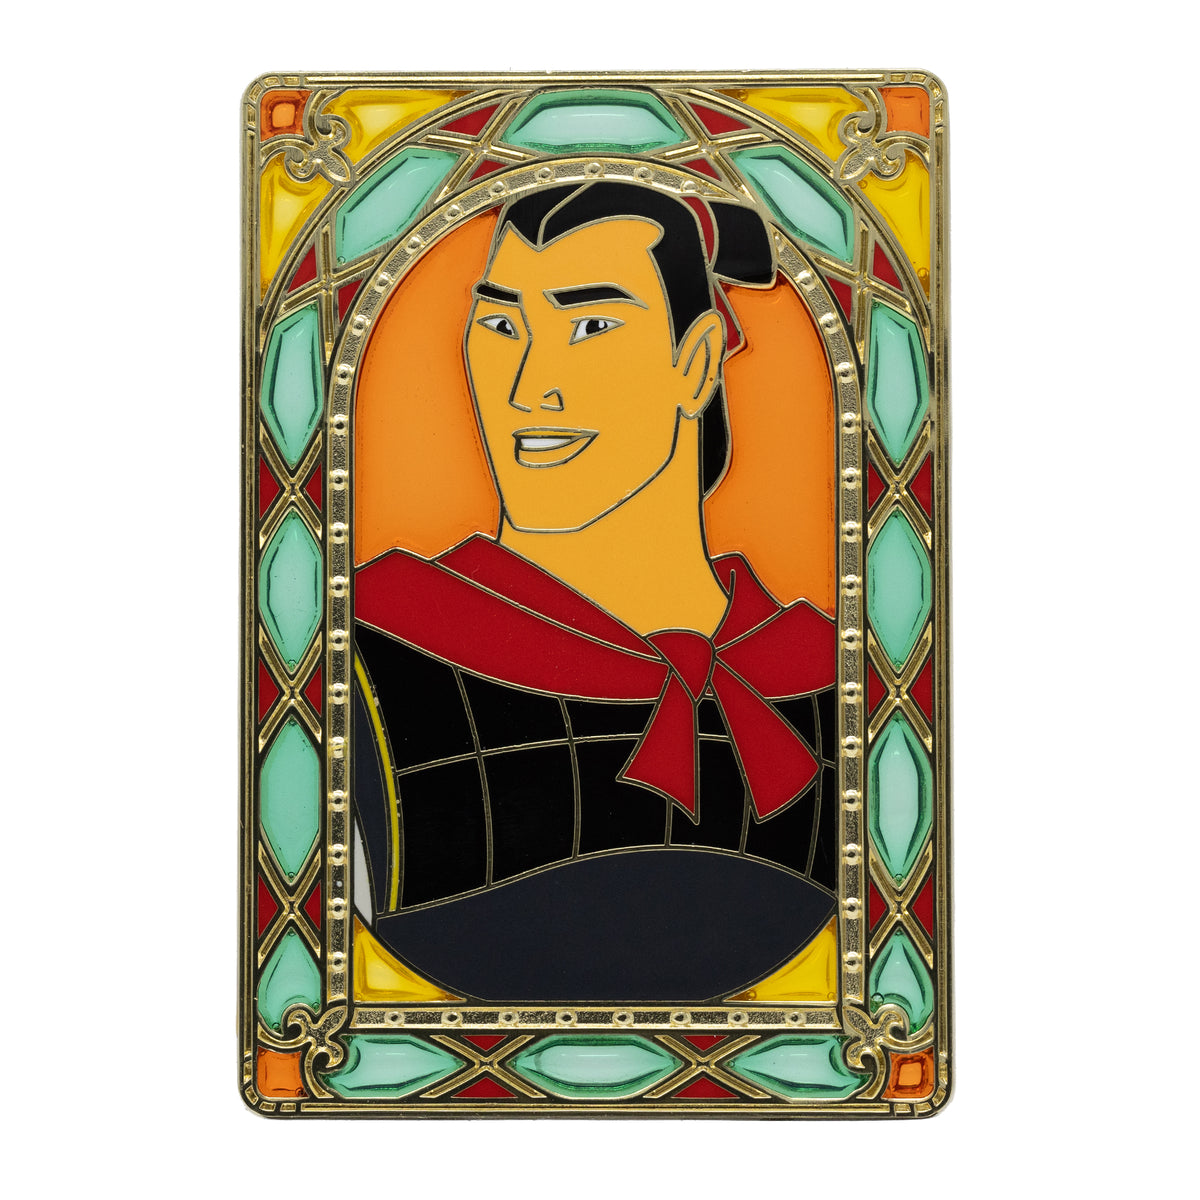 Disney Prince Stained Glass Series Li Shang 3" Collectible Pin Limited Edition 300